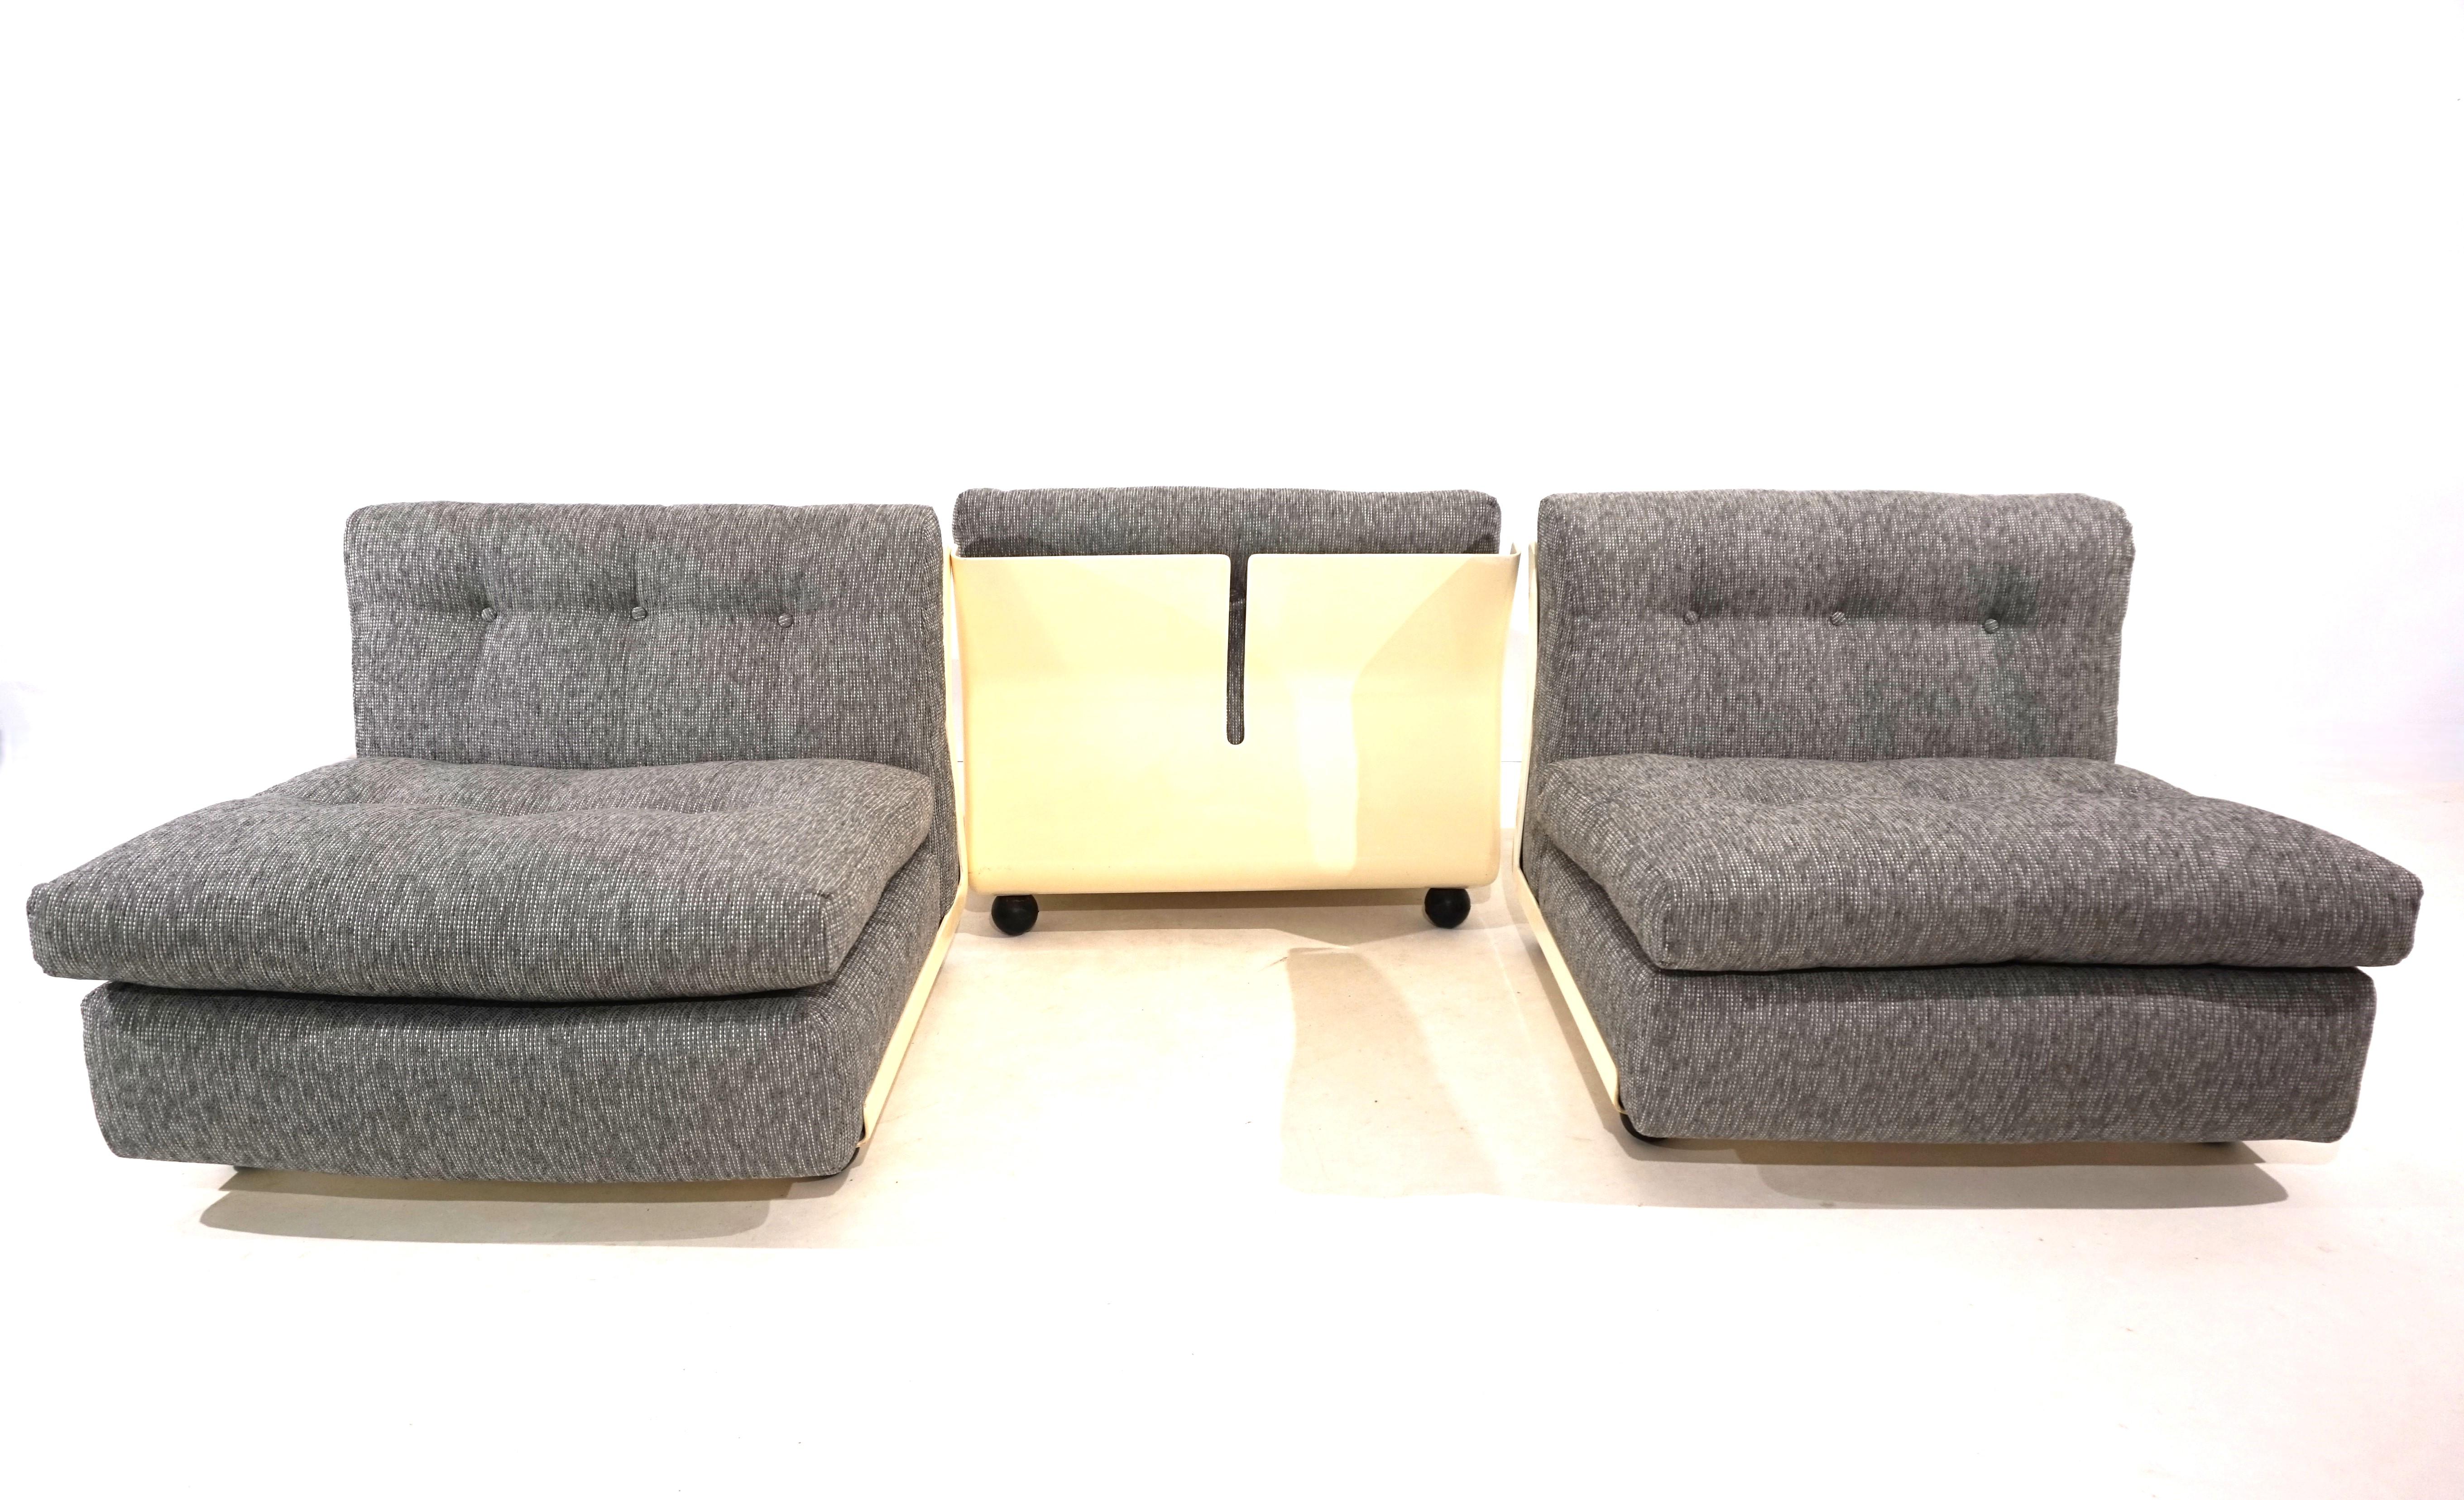 A set of three Amanta modular armchairs in a high-quality platinum/silver boucle fabric with light fiberglass shells. The armchairs have been newly upholstered and covered and offer first-class seating comfort. The back shells only show minimal